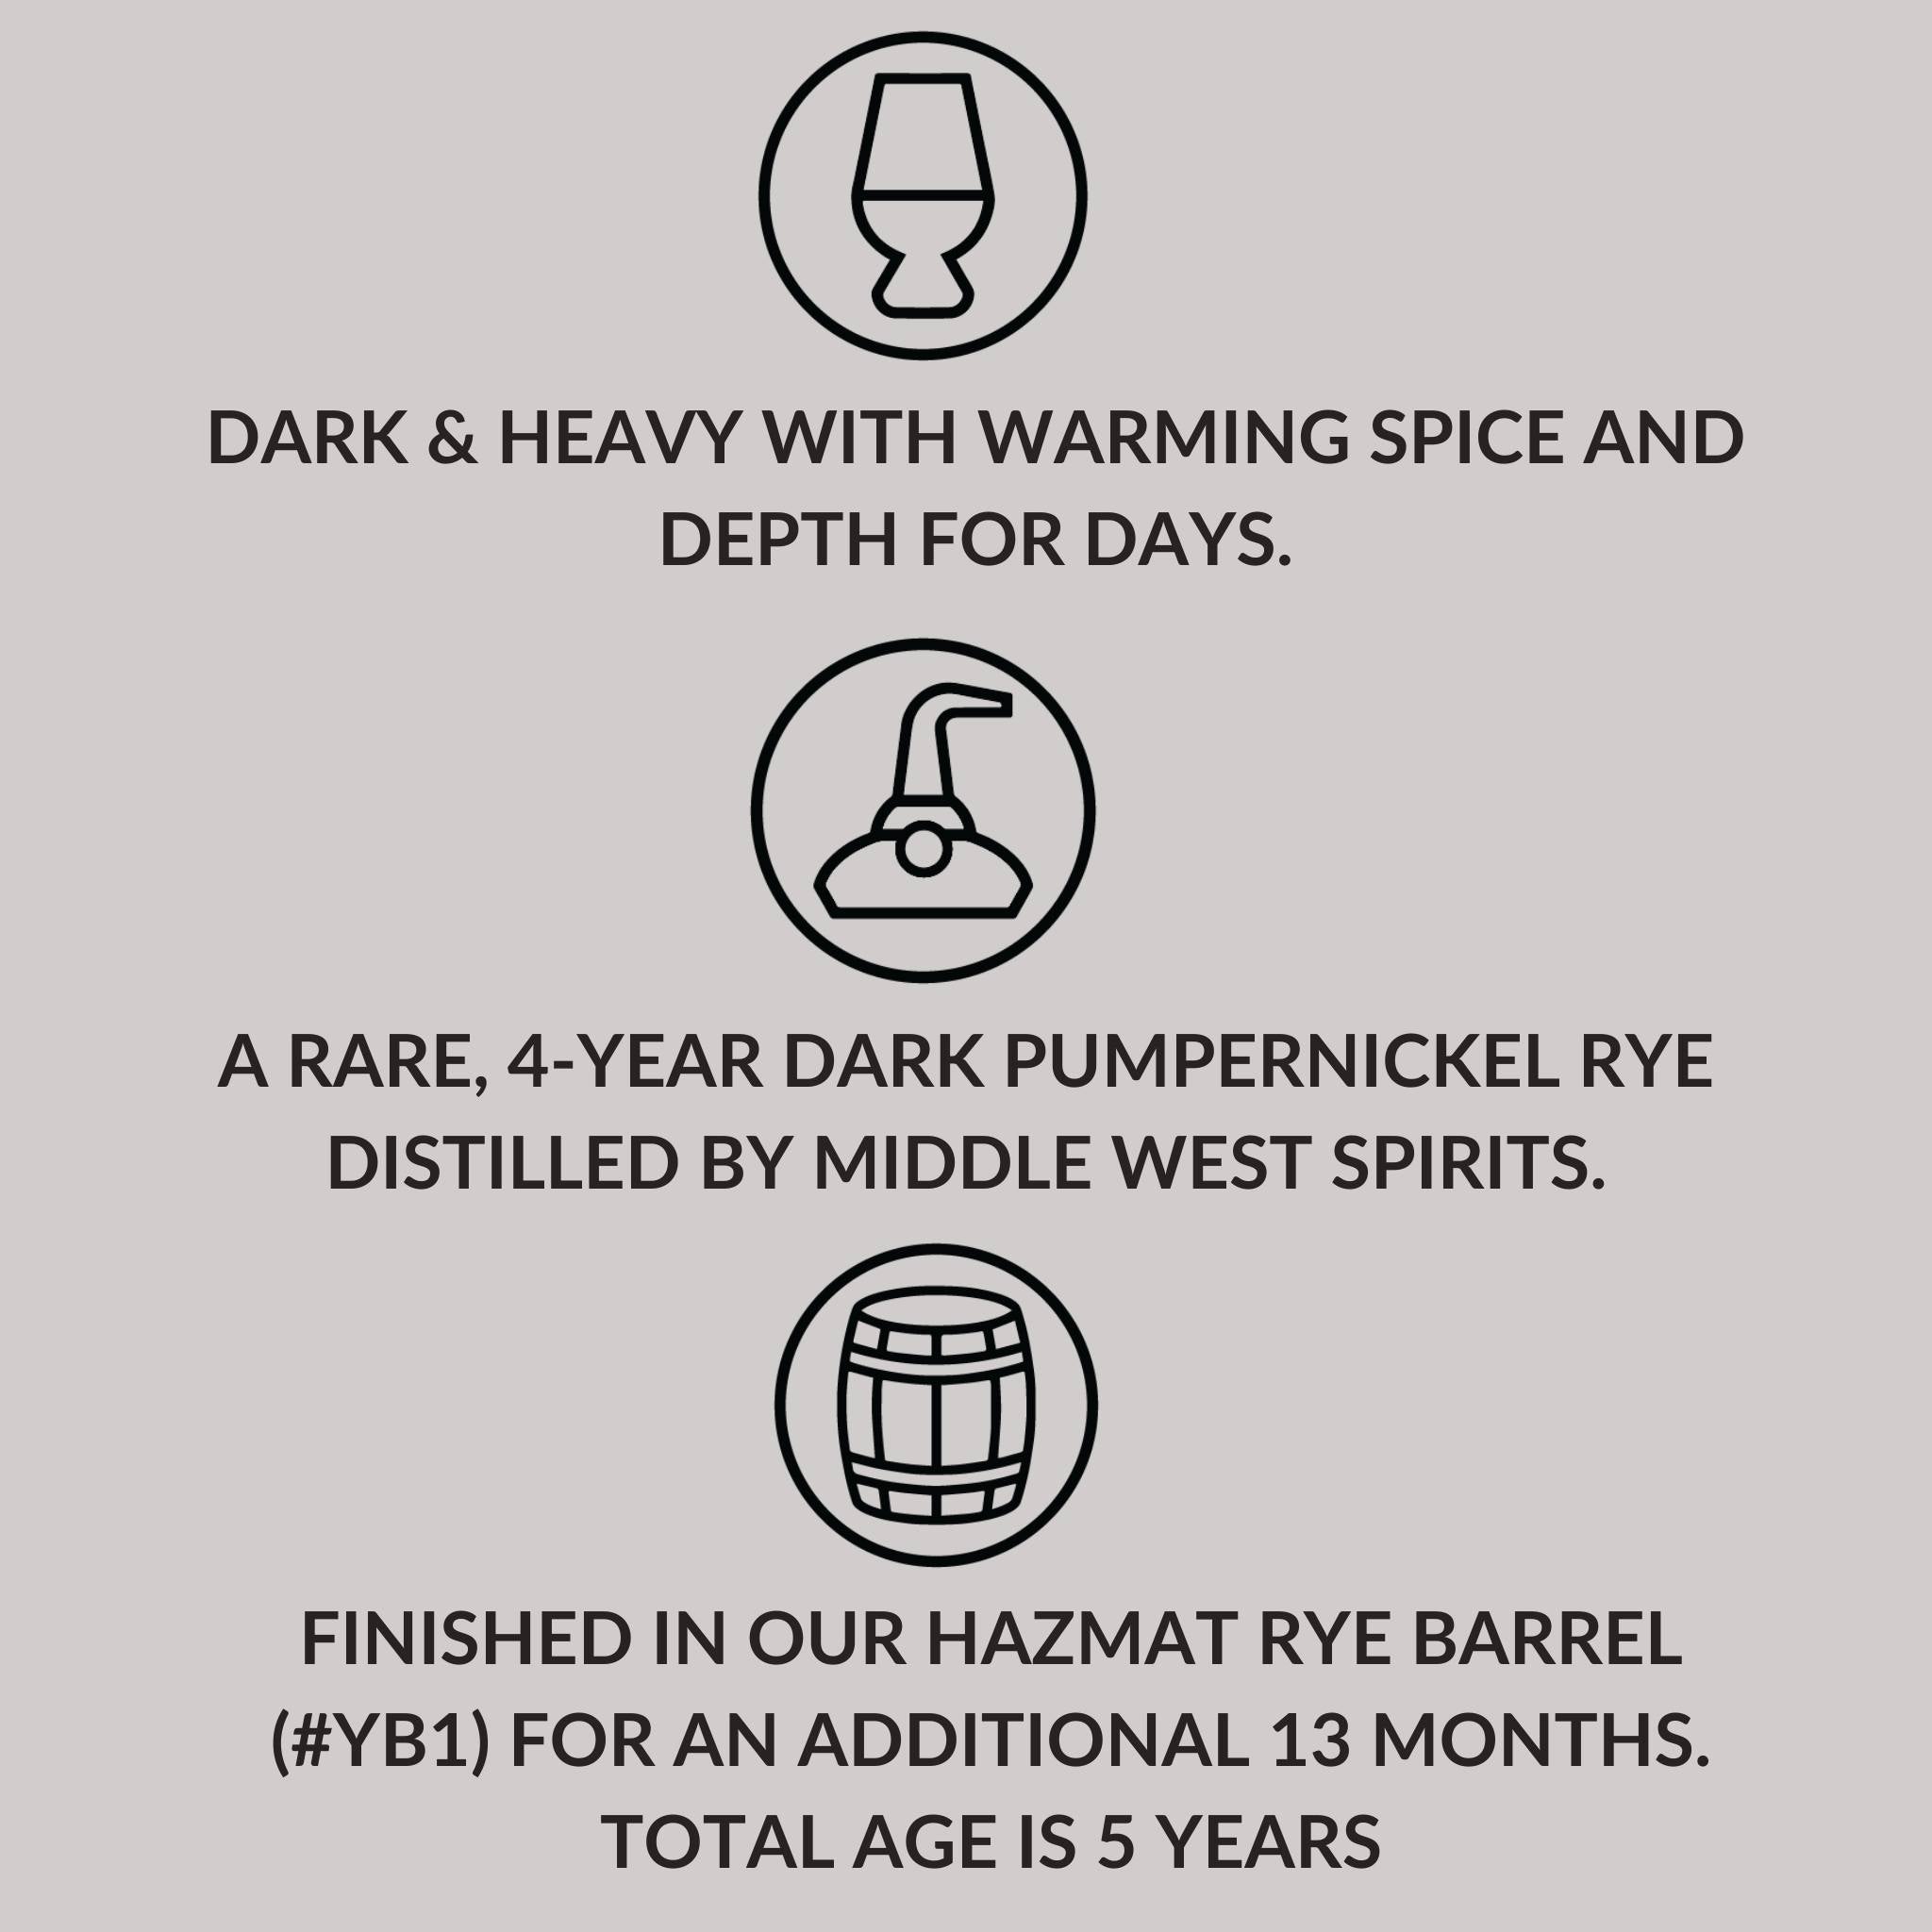 5-Year Ohio Double Barreled Pumpernickel Rye Whiskey Featuring Middle West Spirits